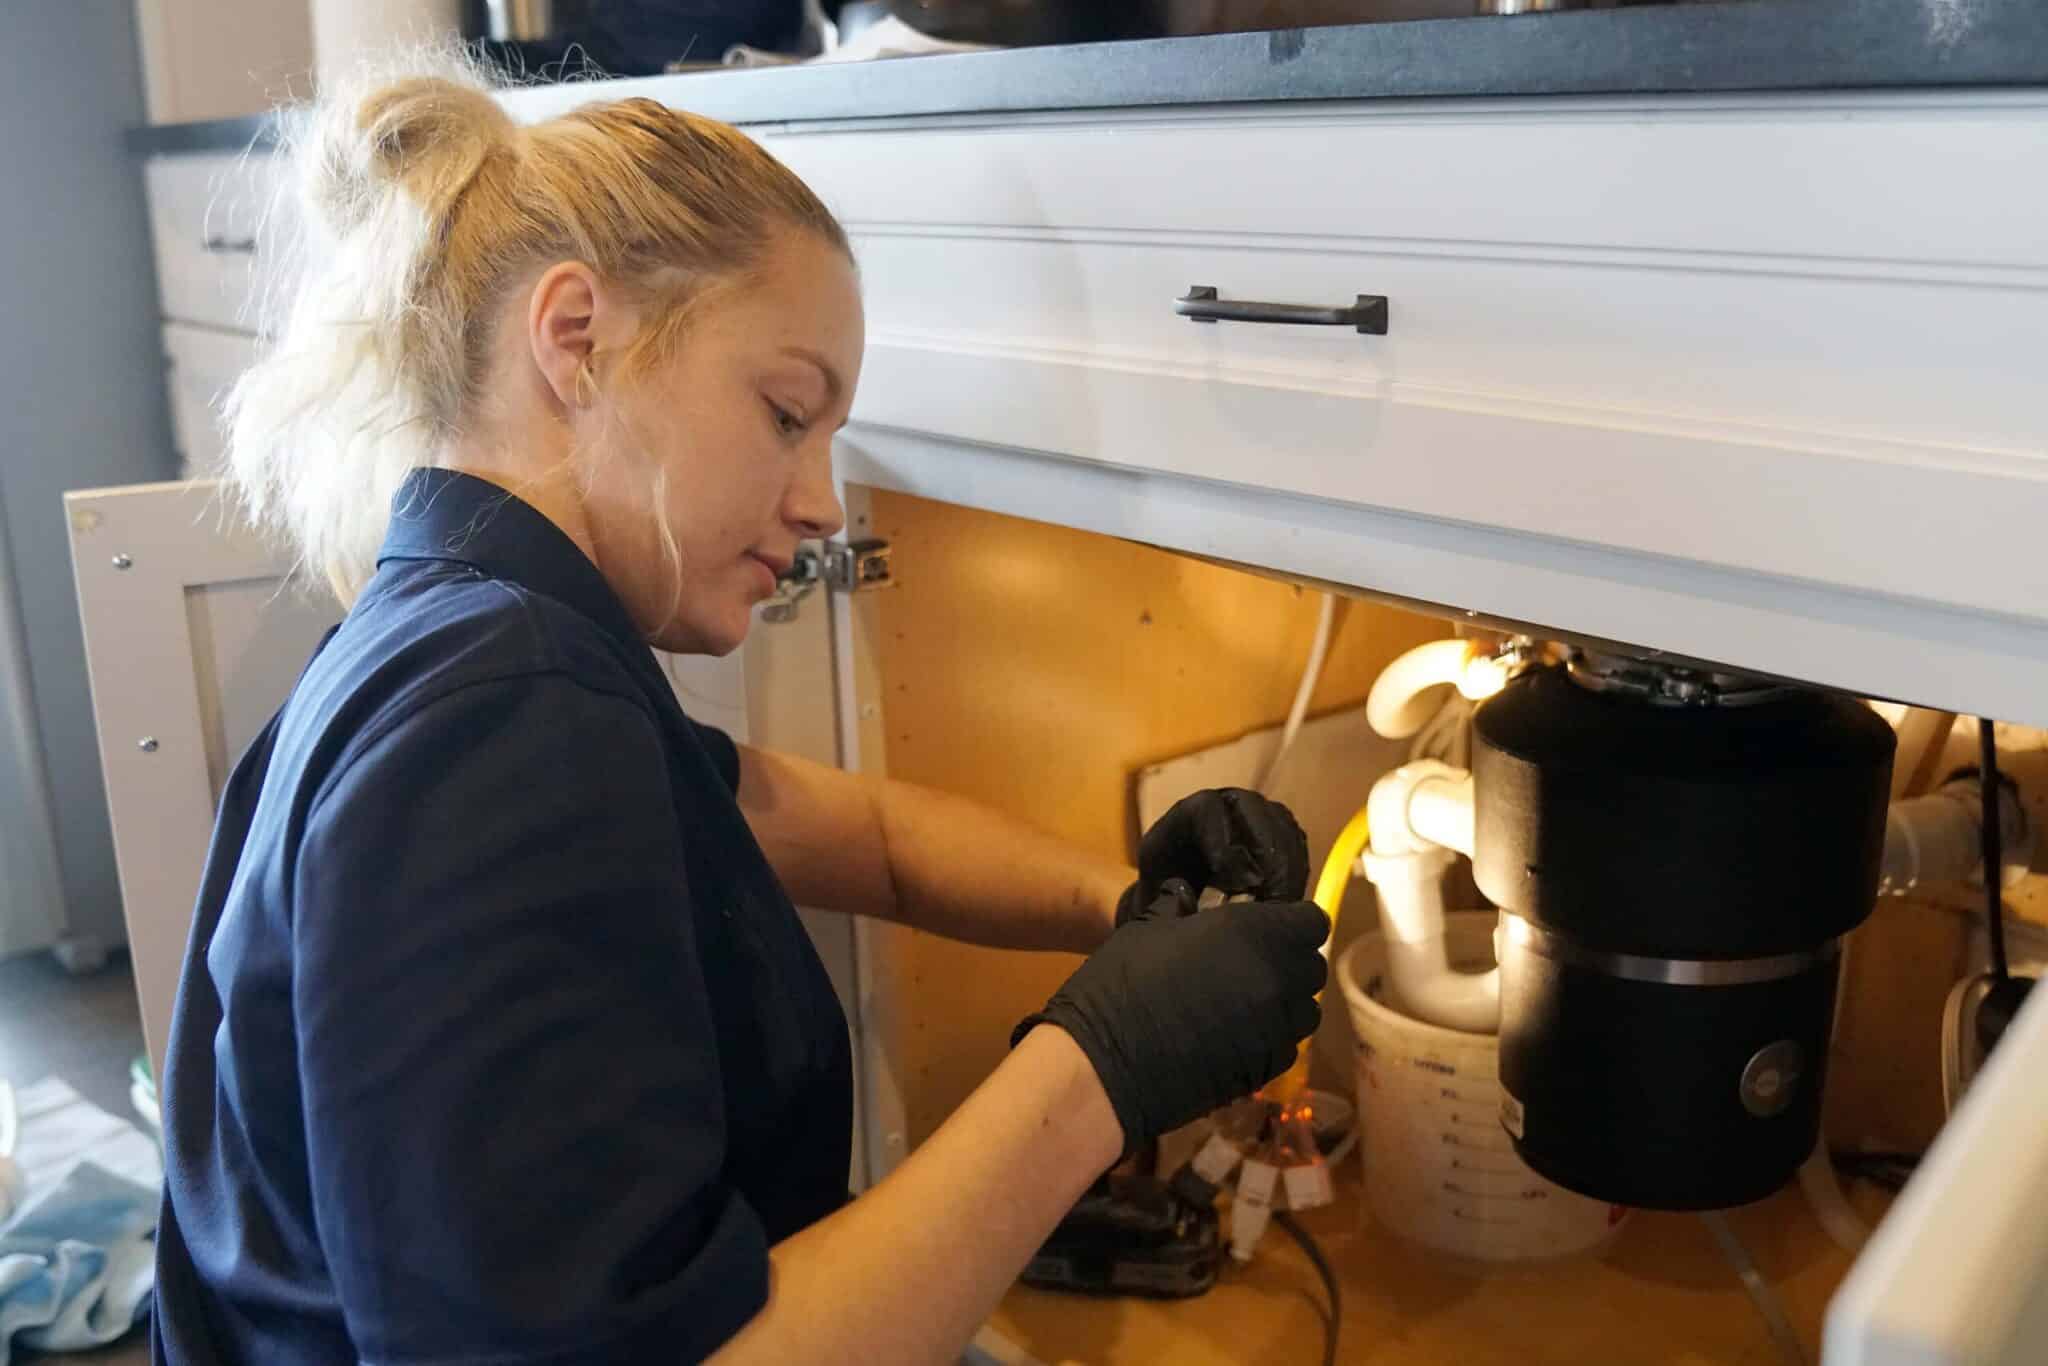 Alexis, a plumber at Radiant Plumbing and Air Conditioning, working on a garbage disposal